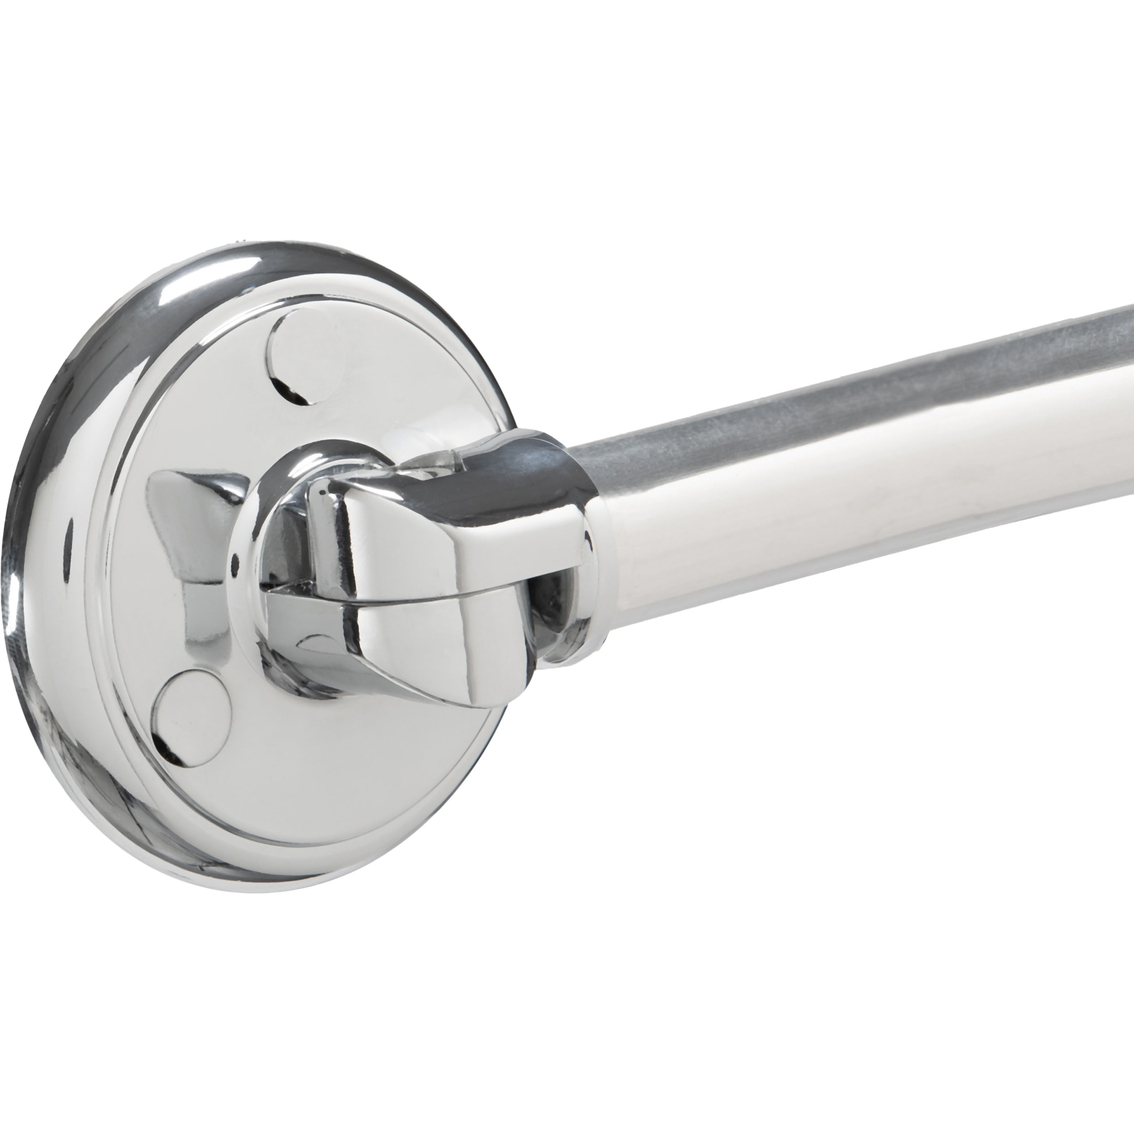 Bath Bliss Wall Mountable Curved Adjustable Shower Rod in Aluminum - Image 3 of 5